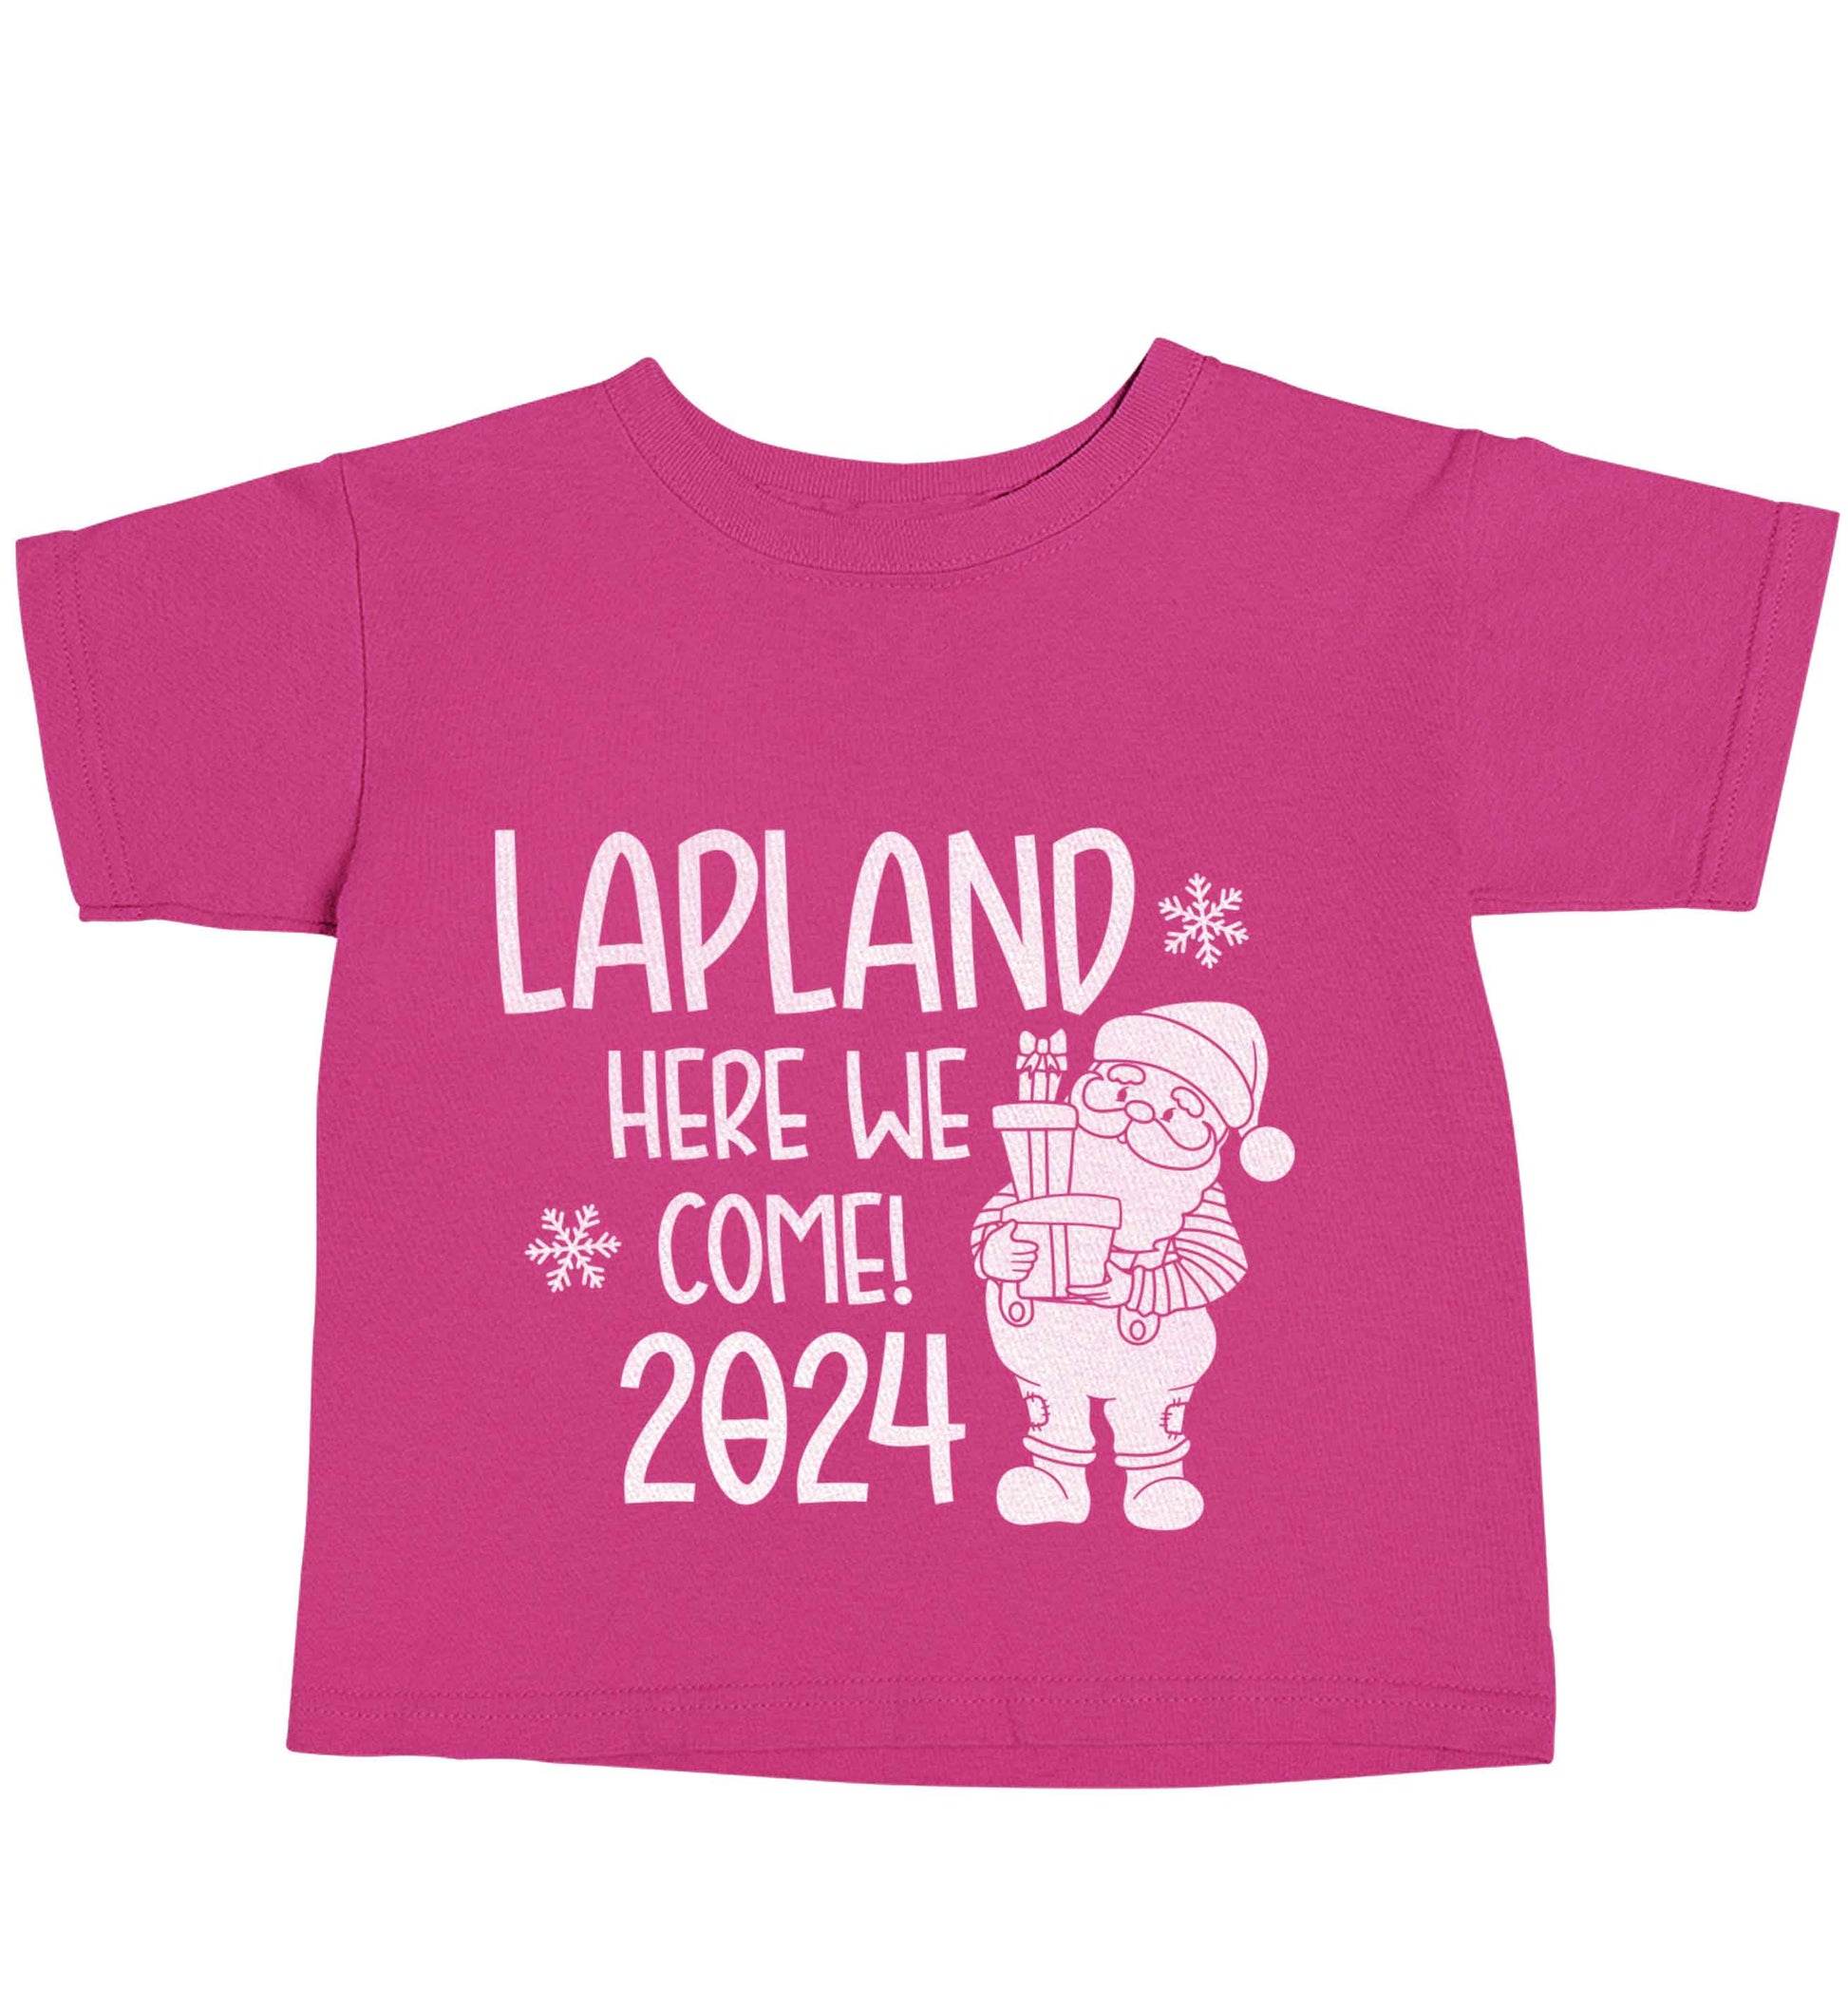 Lapland here we come pink baby toddler Tshirt 2 Years